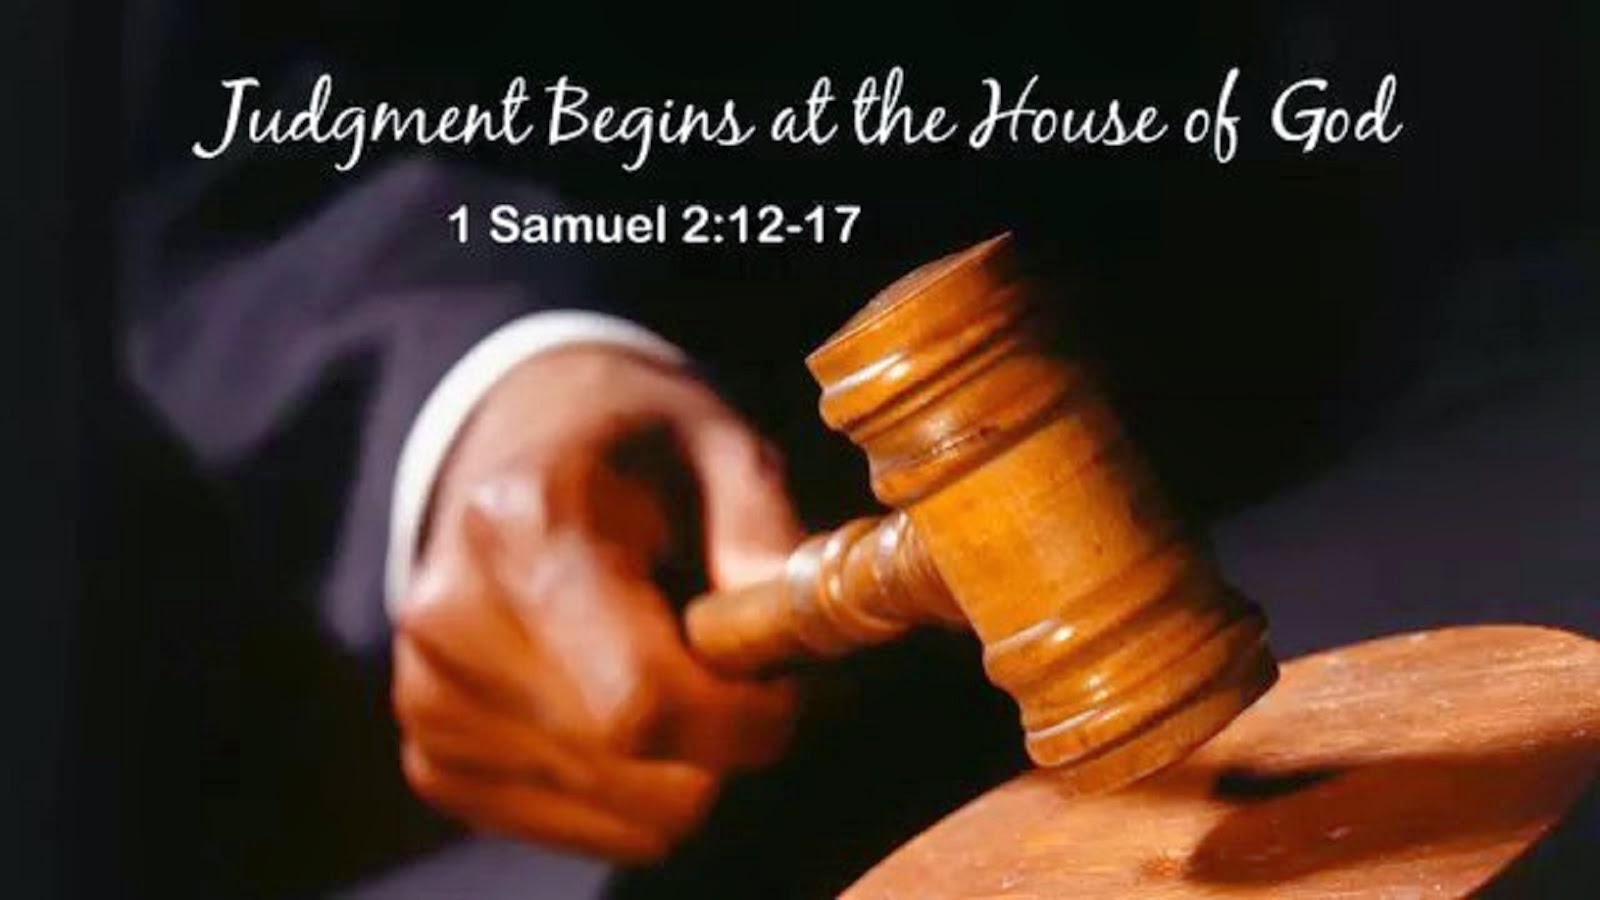 JUDGEMENT BEGINS AT THE HOUSE OF GOD